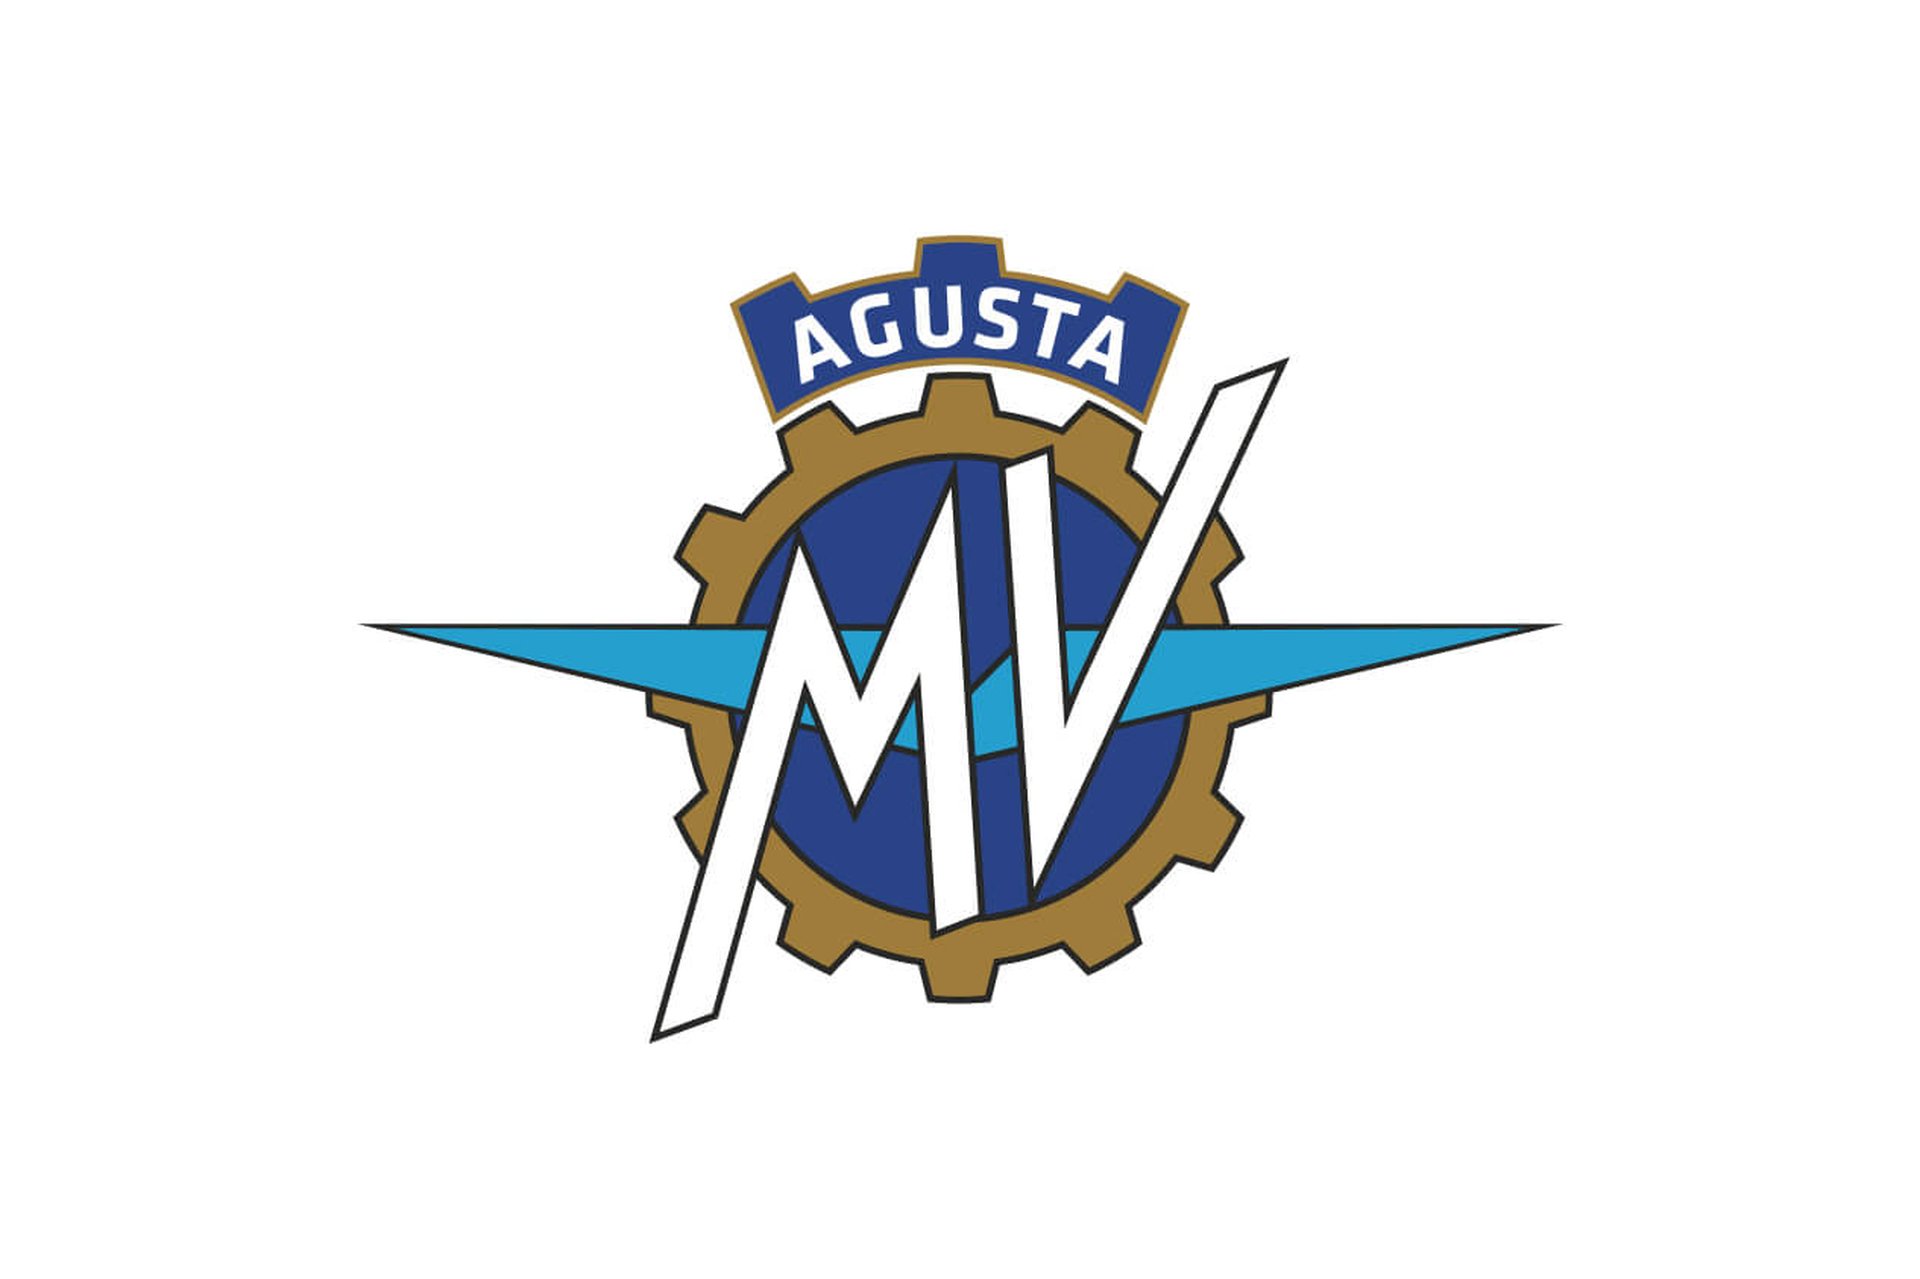 MV AGUSTA ANNOUNCES FINAL RESOLUTION  OF COMPOSITION WITH CREDITORS